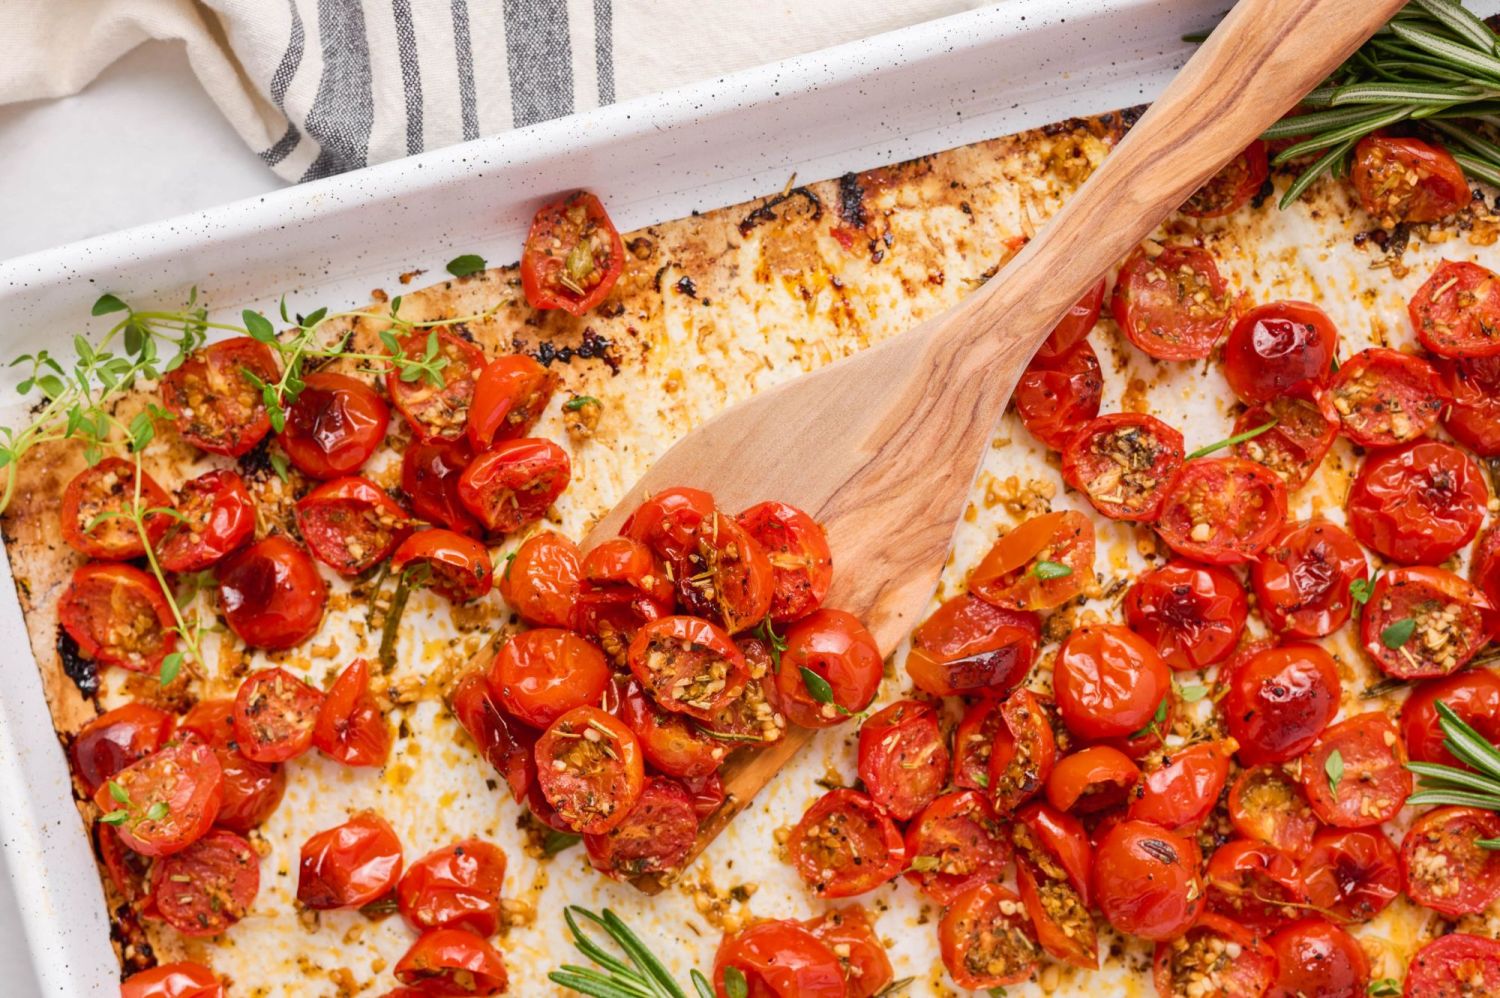 Garlic roasted cherry tomatoes with fresh herbs being scooped with a wooden spoon.